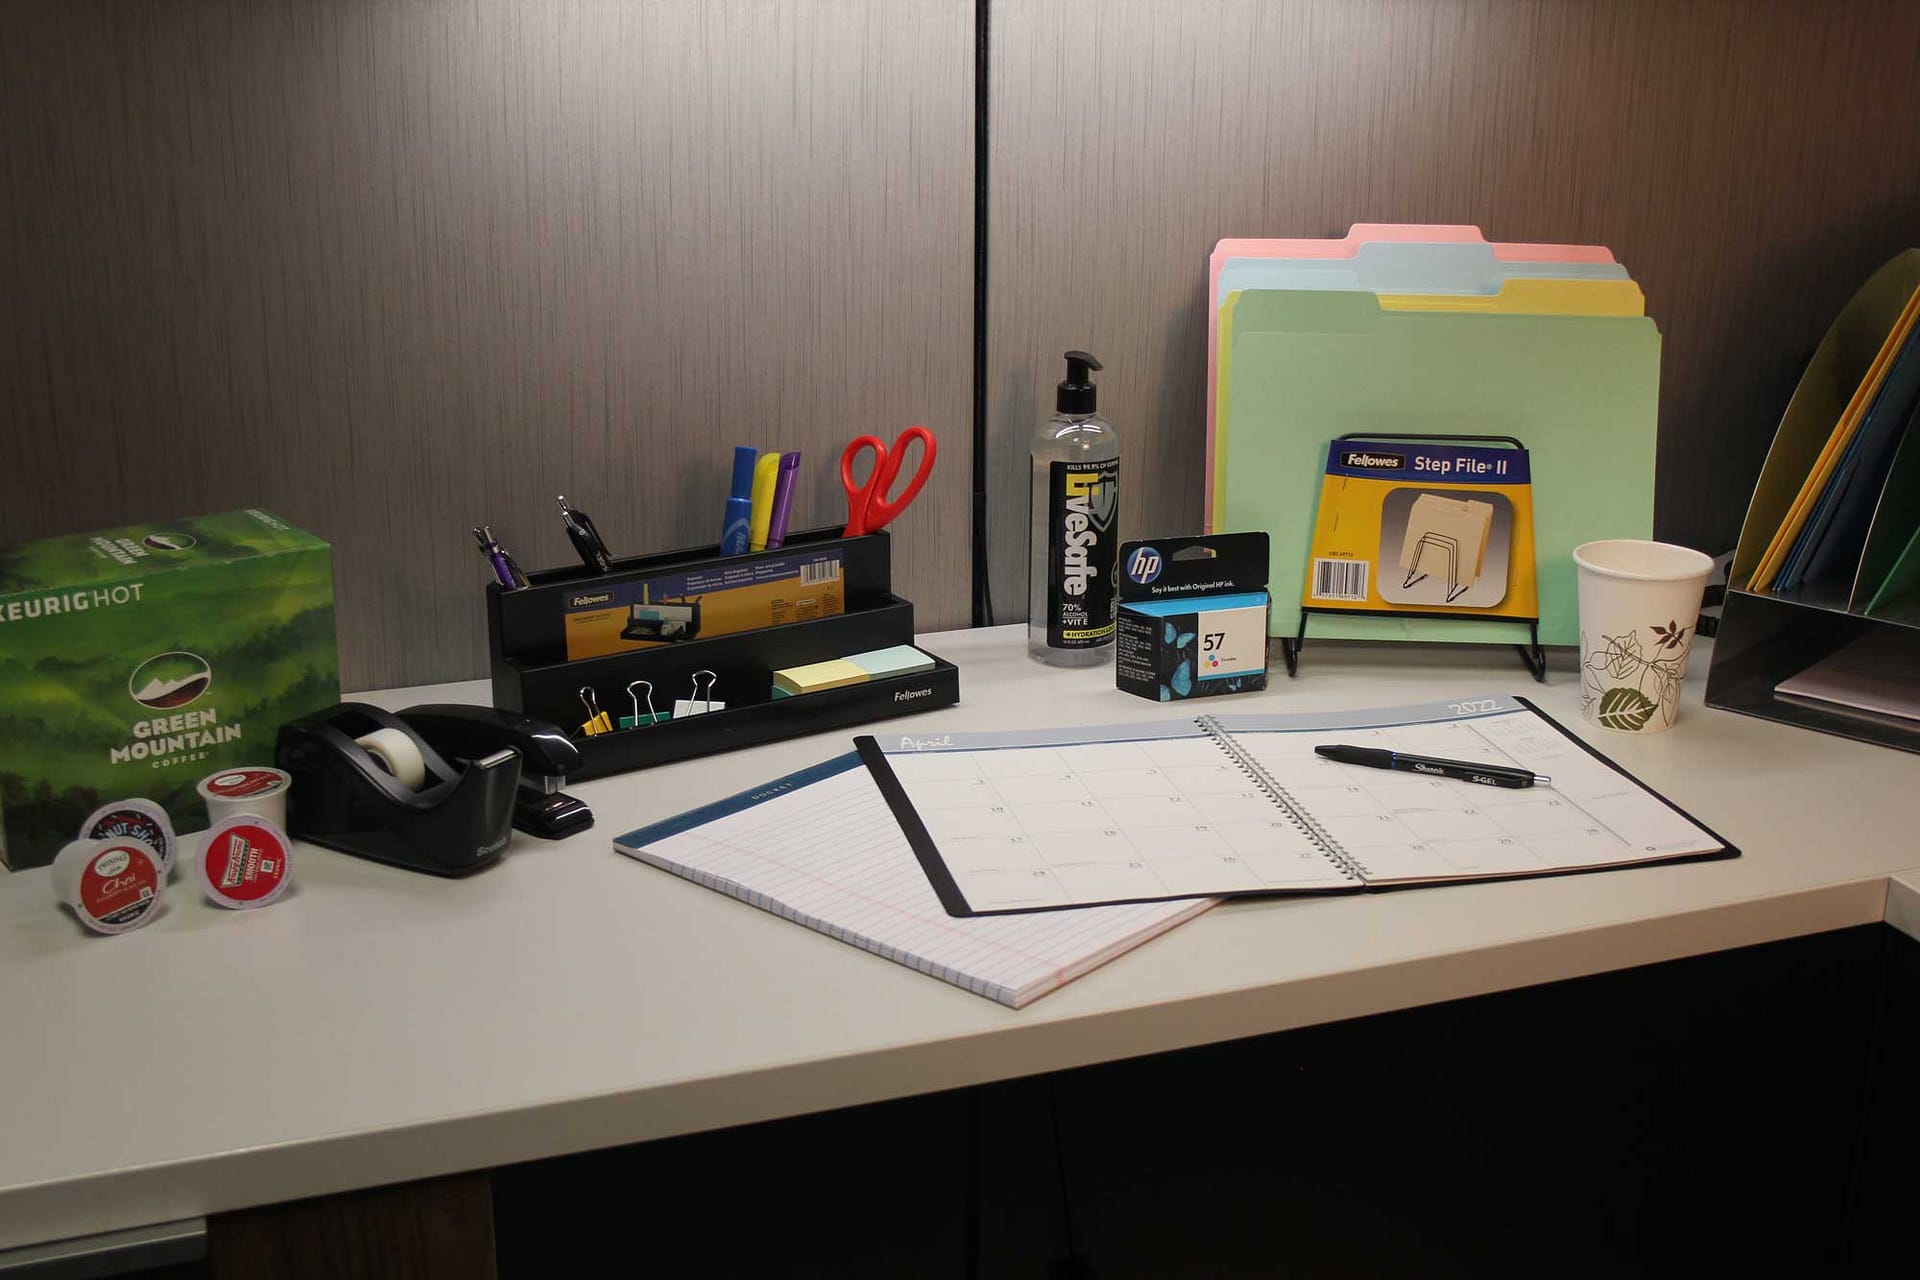 FSIoffice | Office Supplies For Every Workplace